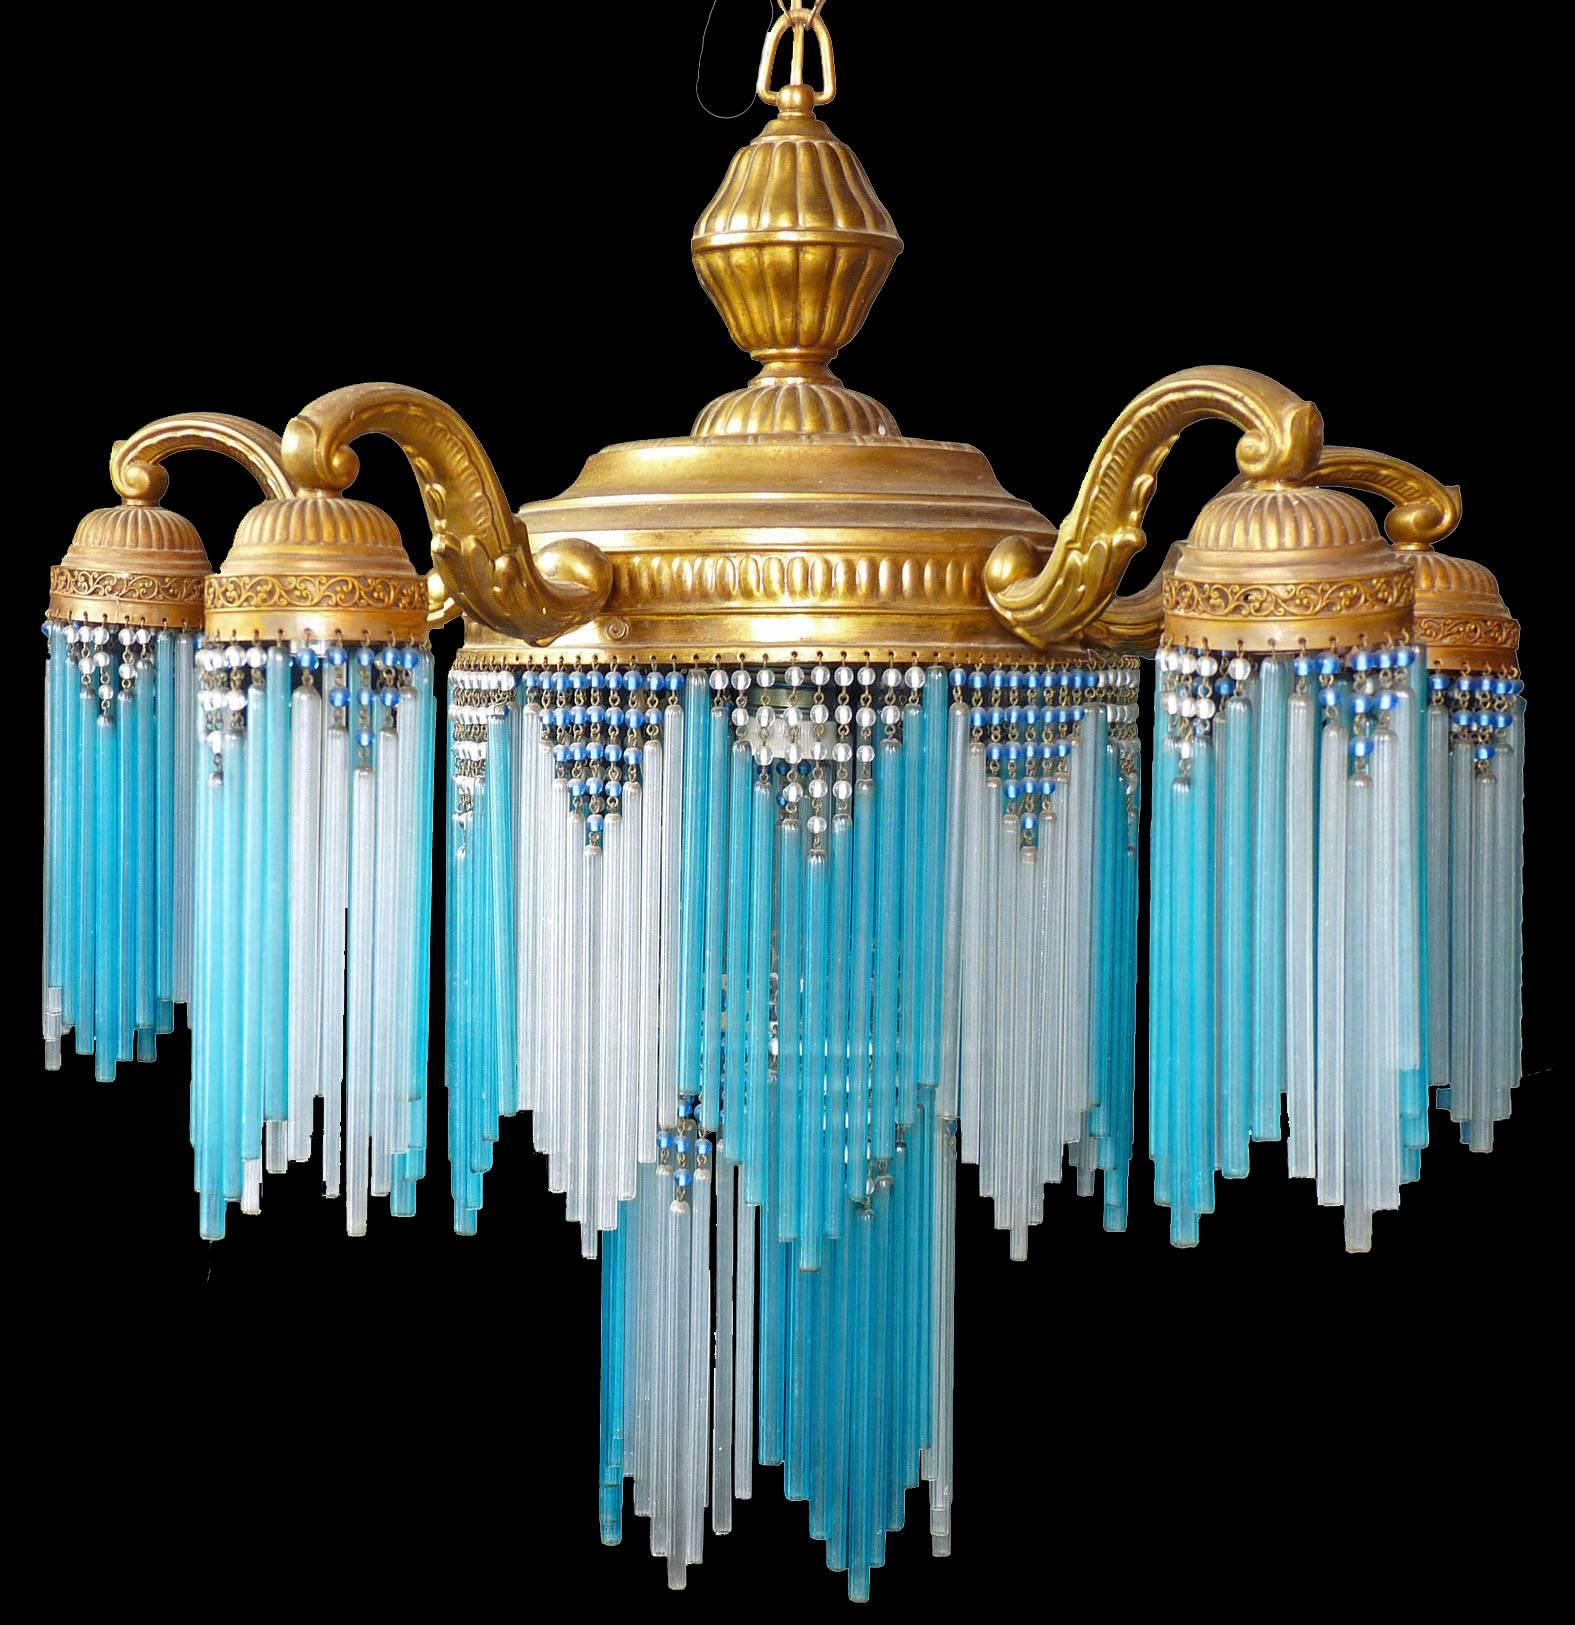 Gorgeous antique French chandelier in clear and turquoise blue beaded glass tubes, Art Deco / Art Nouveau
Pressed brass and fine glass straw tubes adorned with beads on the end of each tube.It has hundreds of glass straw crystals.
Measures: